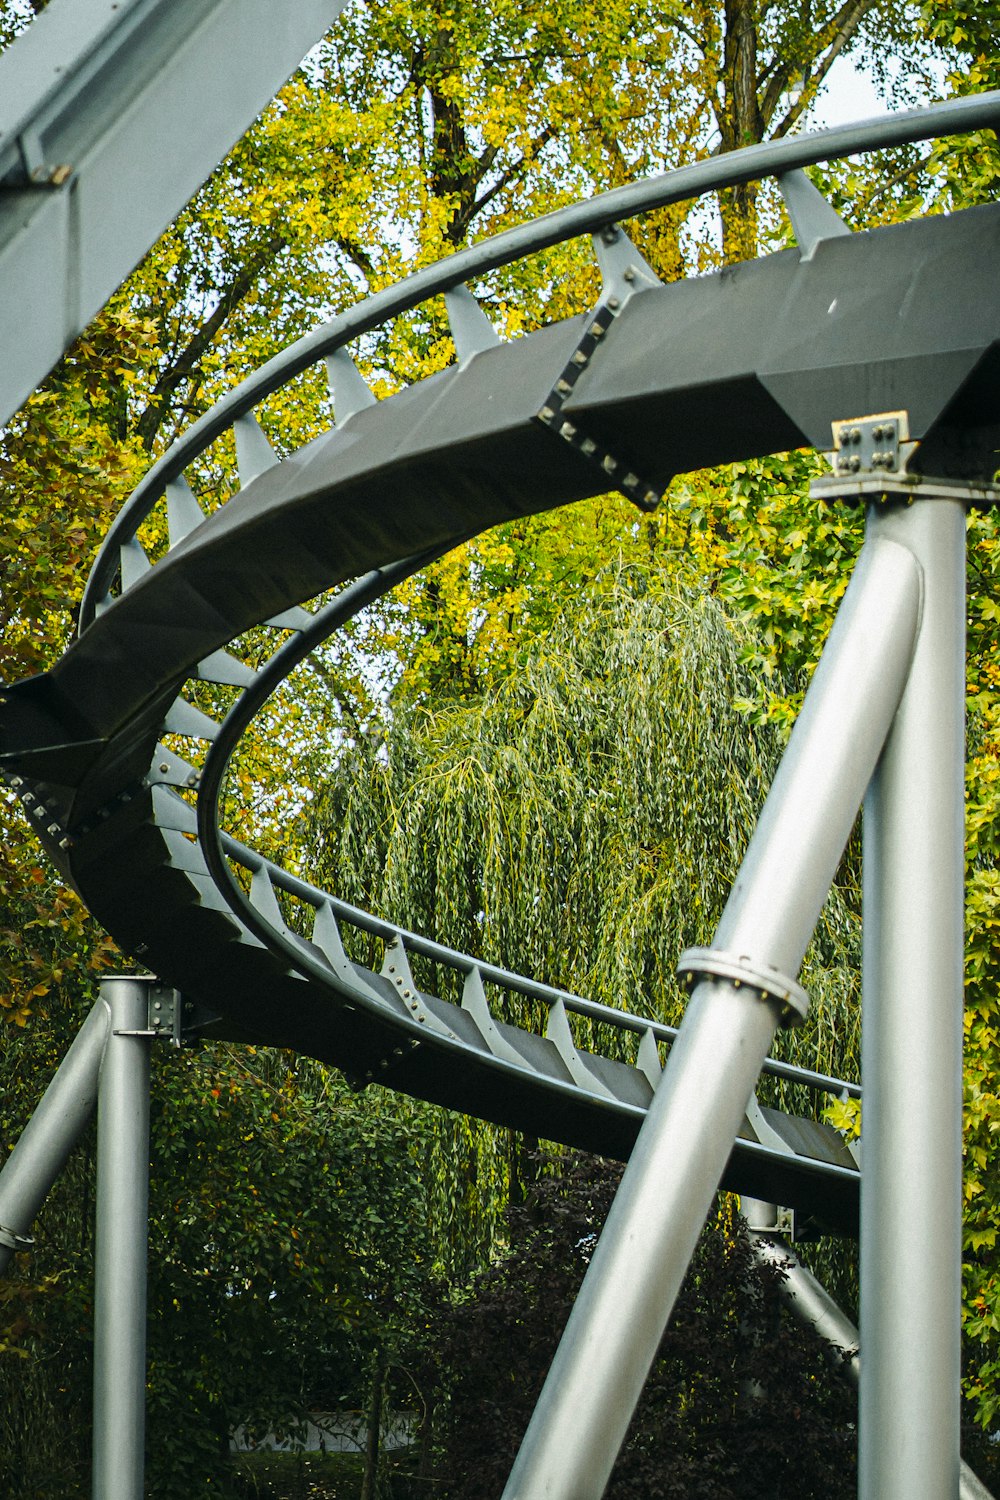 a roller coaster in a park with trees in the background